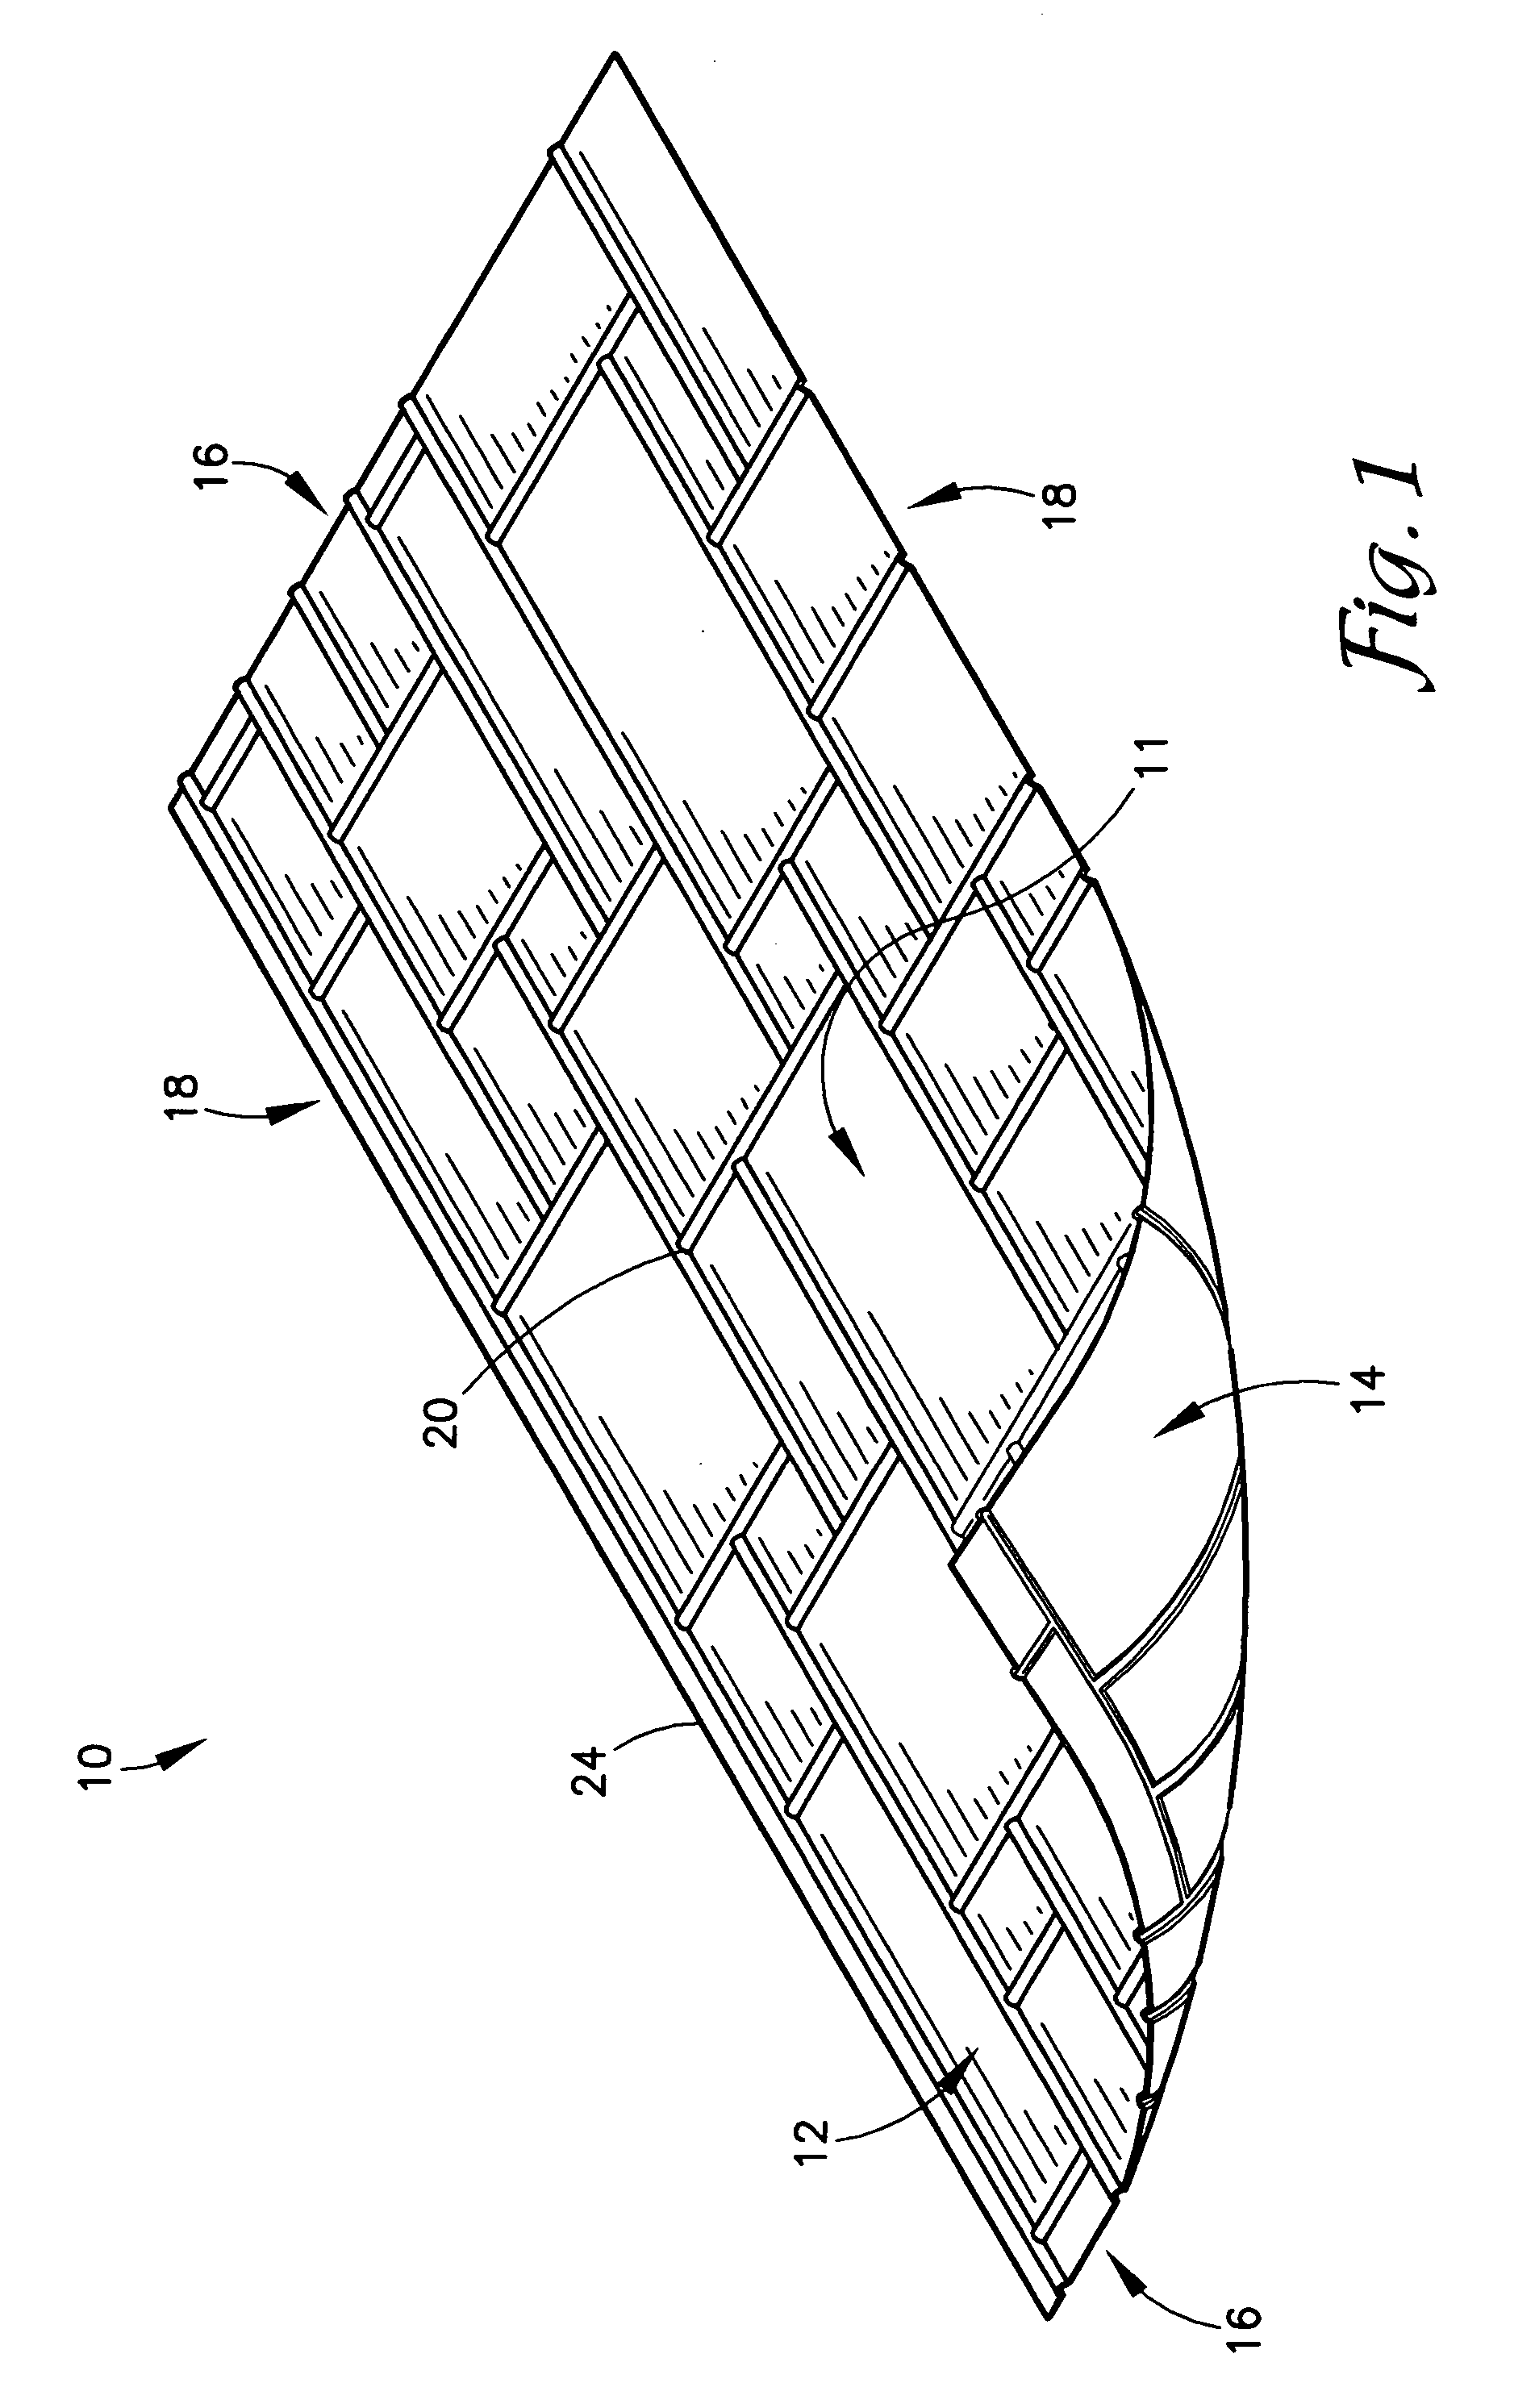 Reversible and flexible liner for imprinting a decorative pattern on a malleable surface and a method of using same